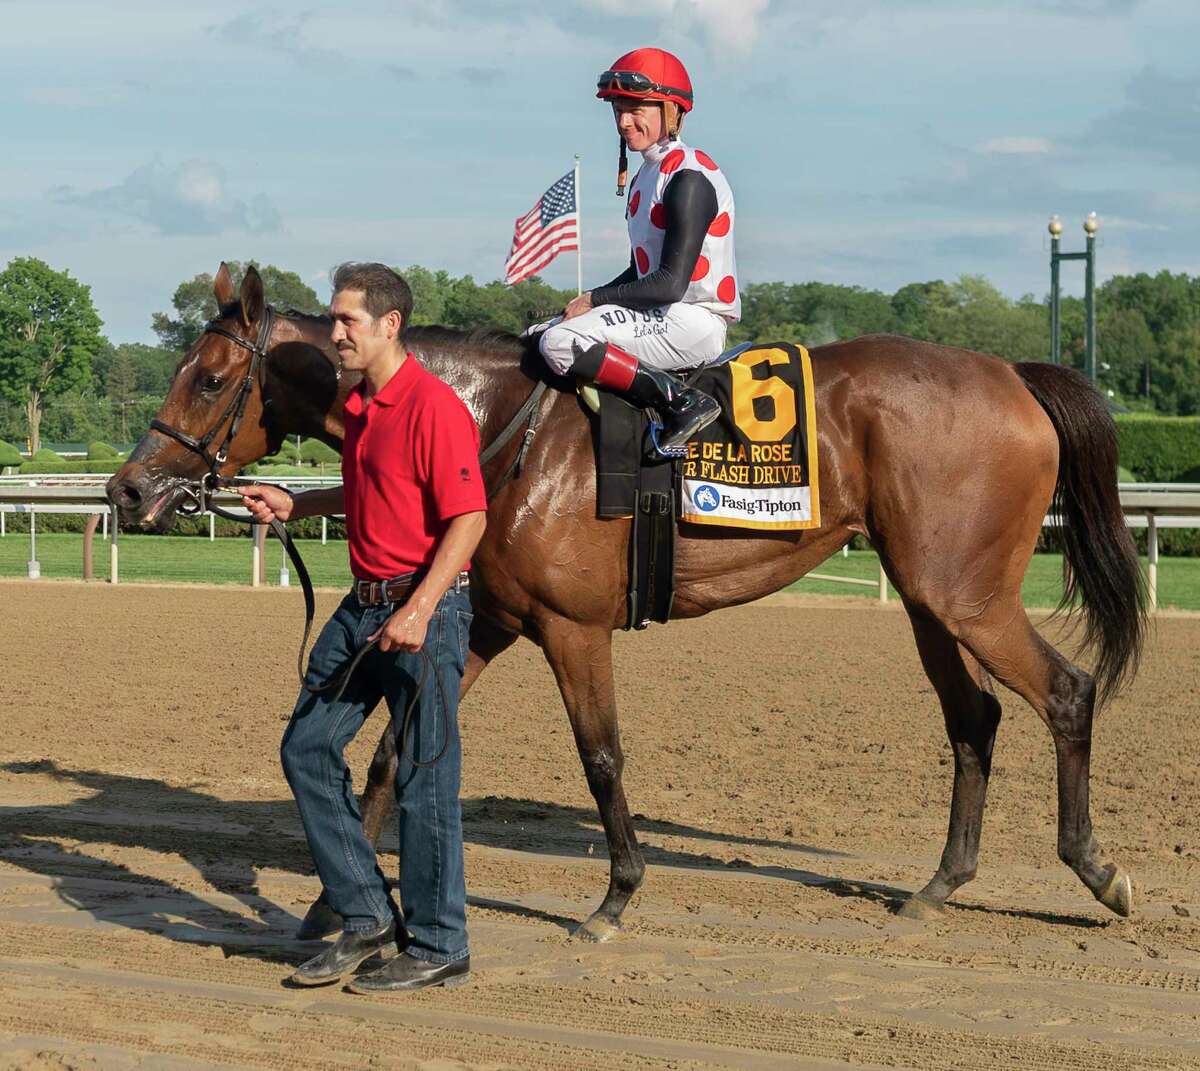 Our Flash Drive with jockey Dylan Davis on board is lead in a circle in front of the grandstand following their victory in the De La Rose stakes at Saratoga Race Course on Sunday, Aug. 7, 2022, in Saratoga Springs, N.Y. (Jenn March, Special to the Times Union)